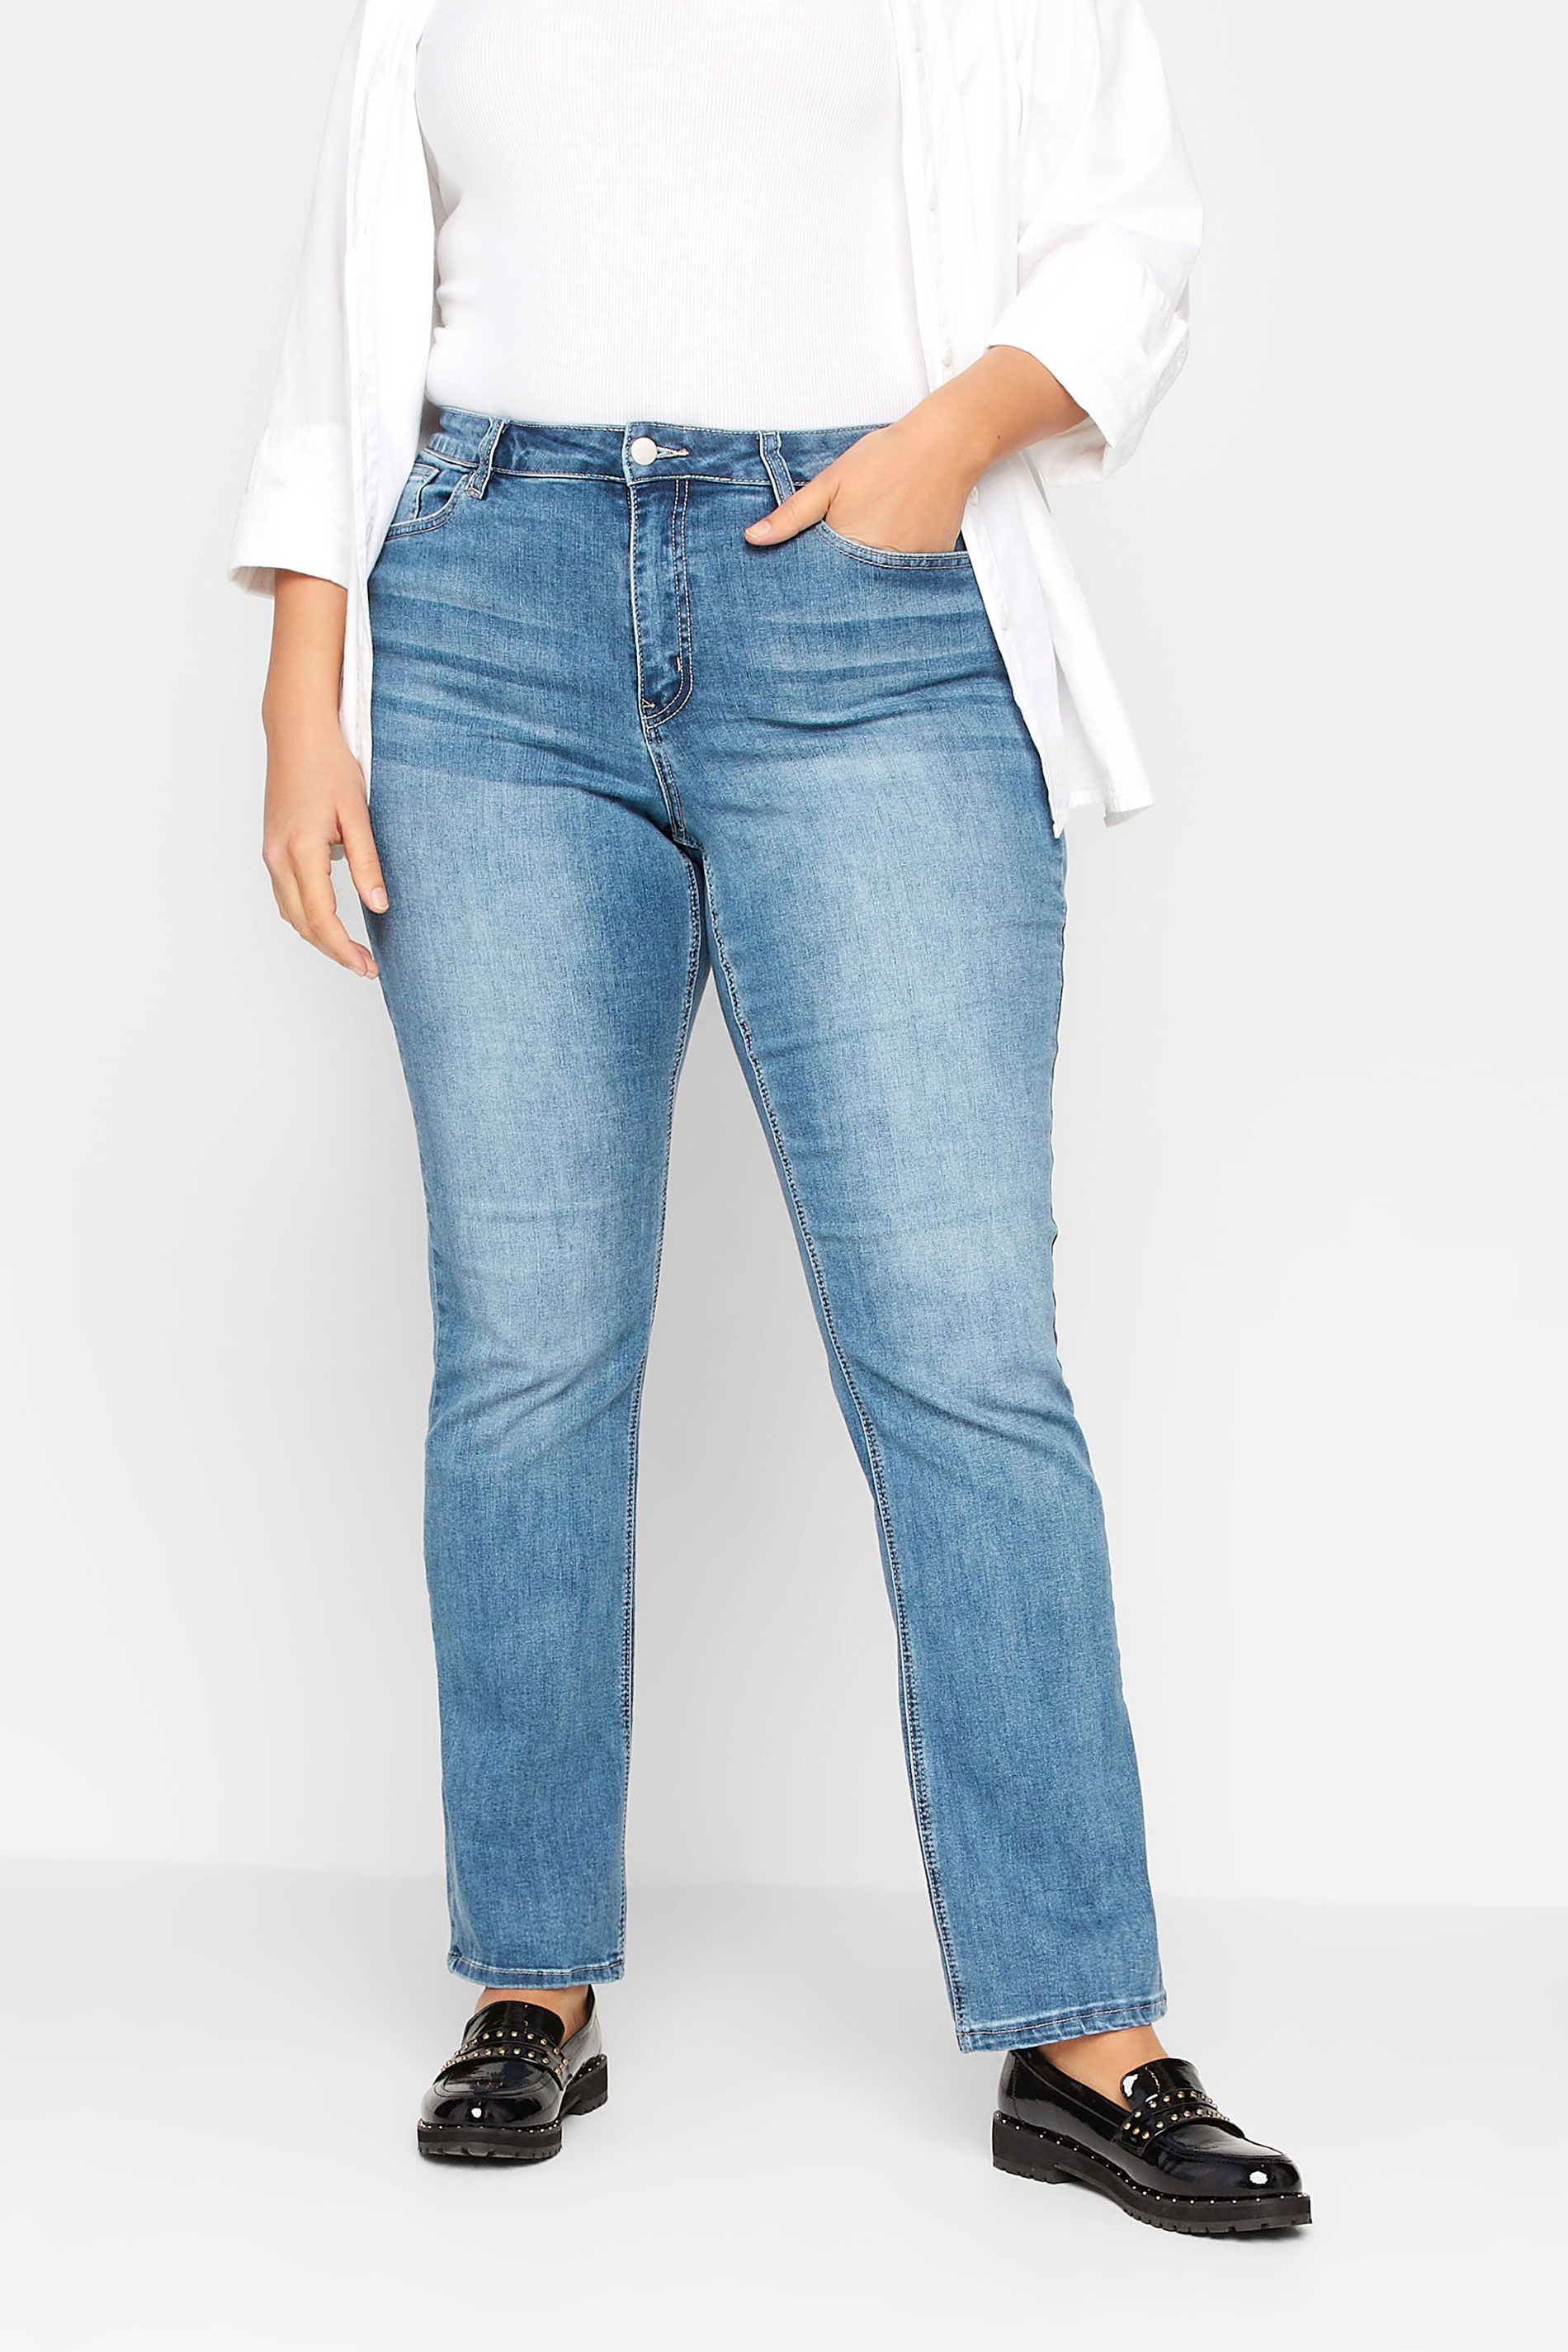 LTS MADE FOR GOOD Pacific Blue Straight Leg Jeans | Long Tall Sally 1